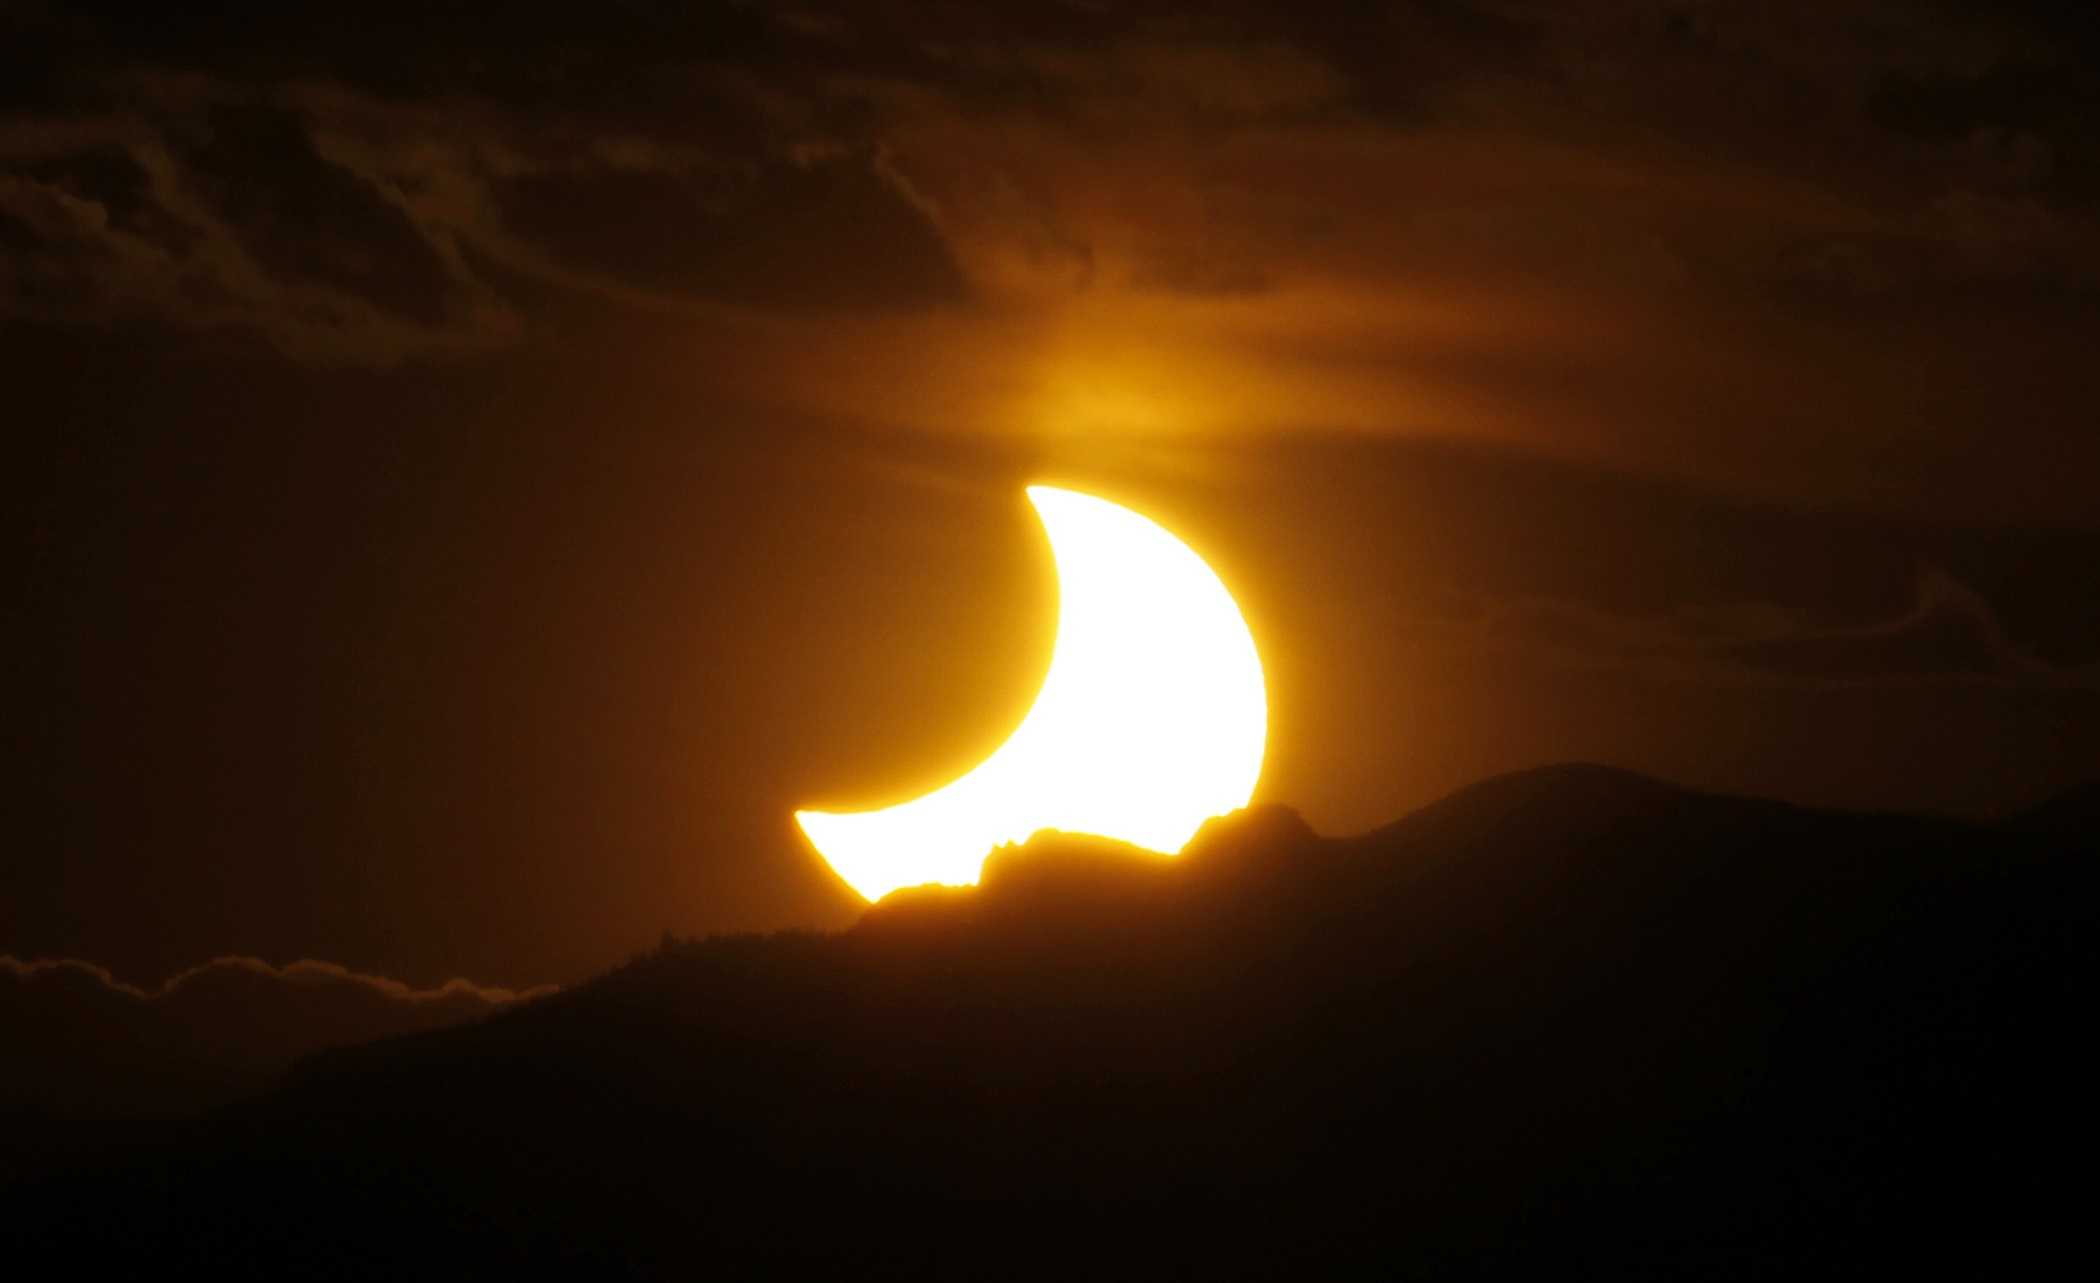 Too many Great American Eclipse viewers could wreak havoc on cellphone service